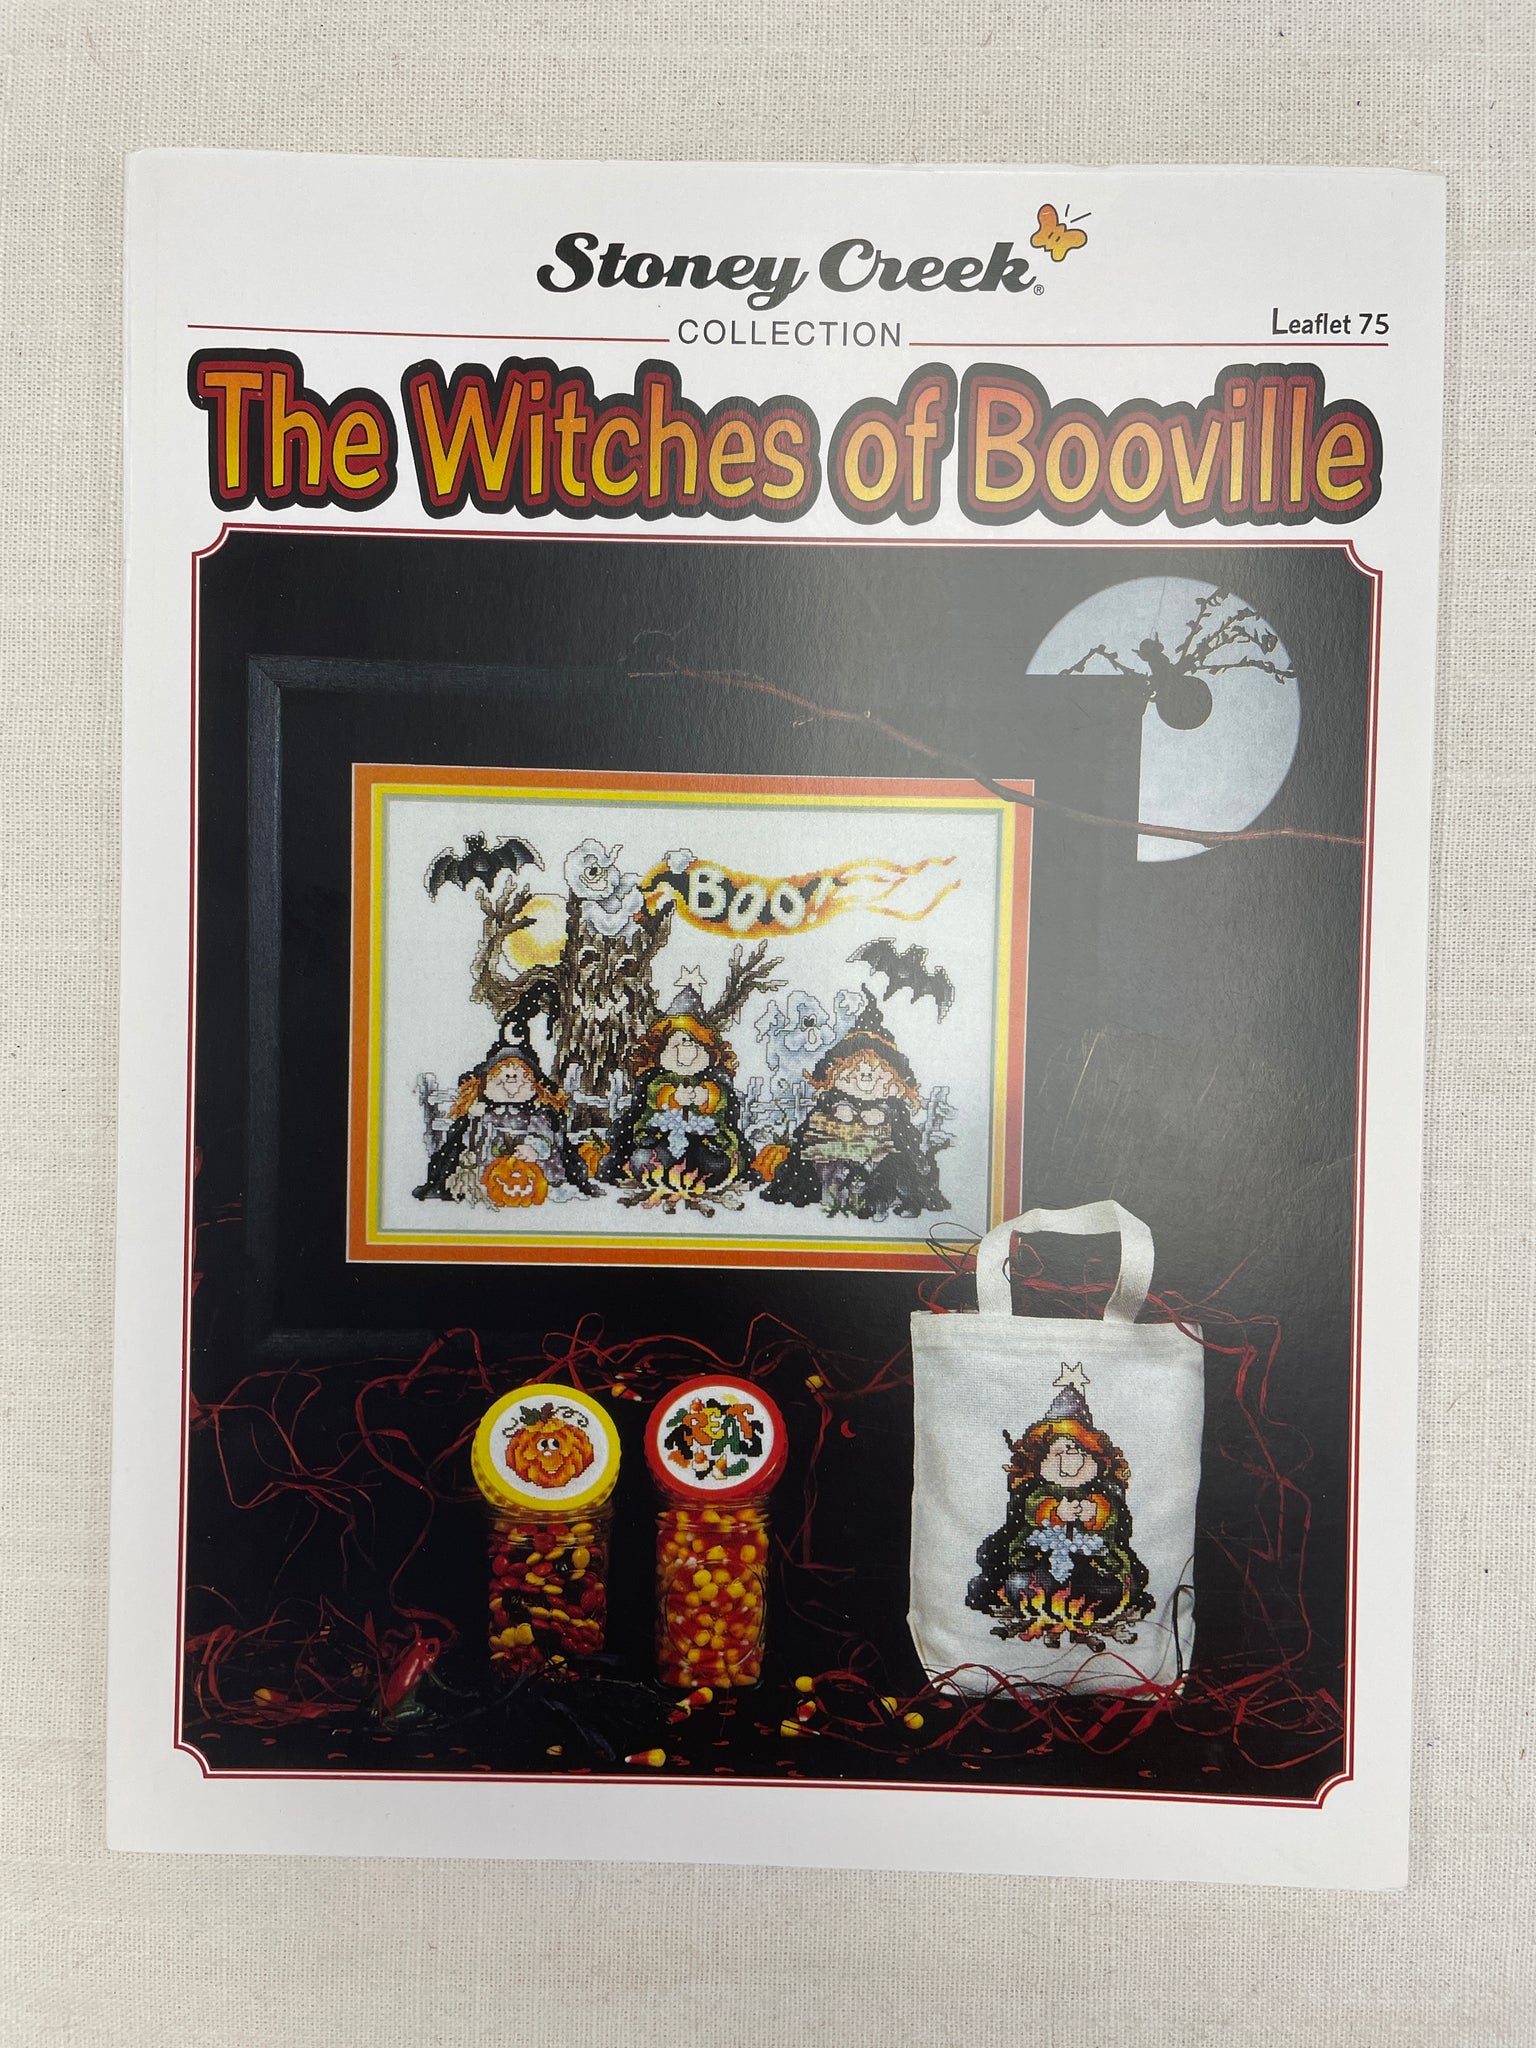 2019 Leaflet Cross Stitch Patterns - "The Witches of Boovile"